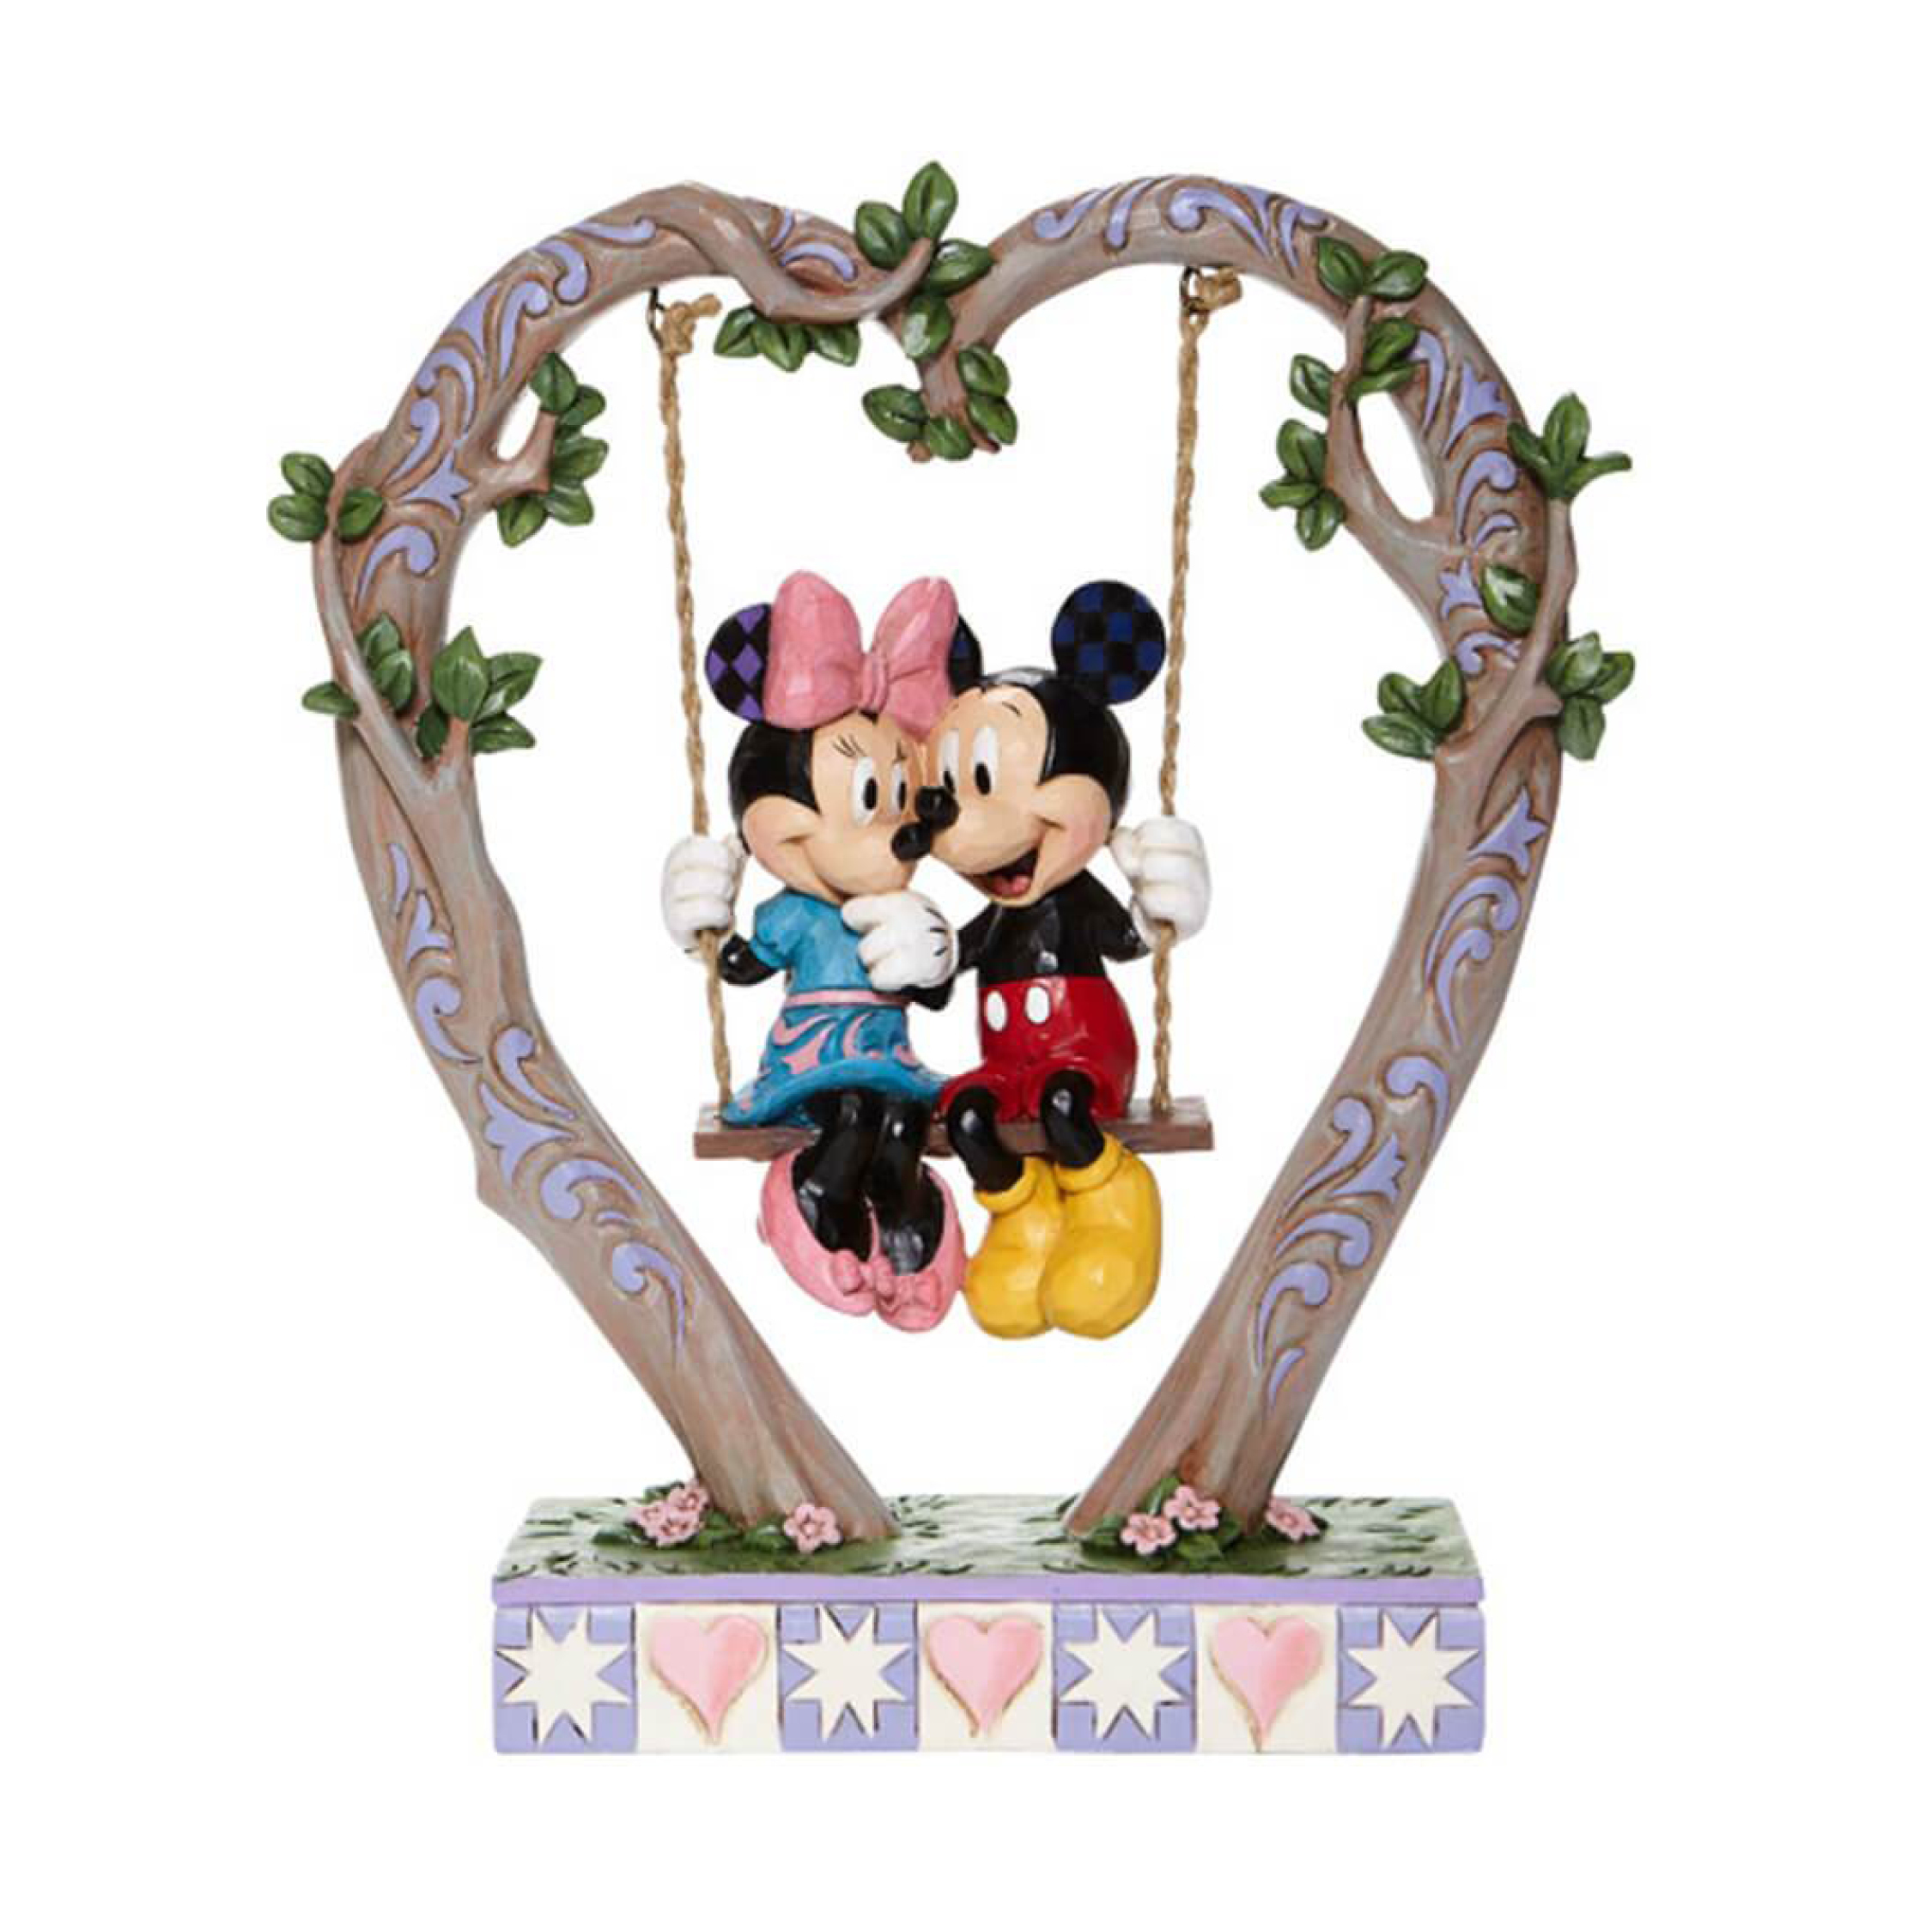 Enesco-Disney-Traditions-Mickey-and-Minnie-Sweethearts-in-Swing.jpg